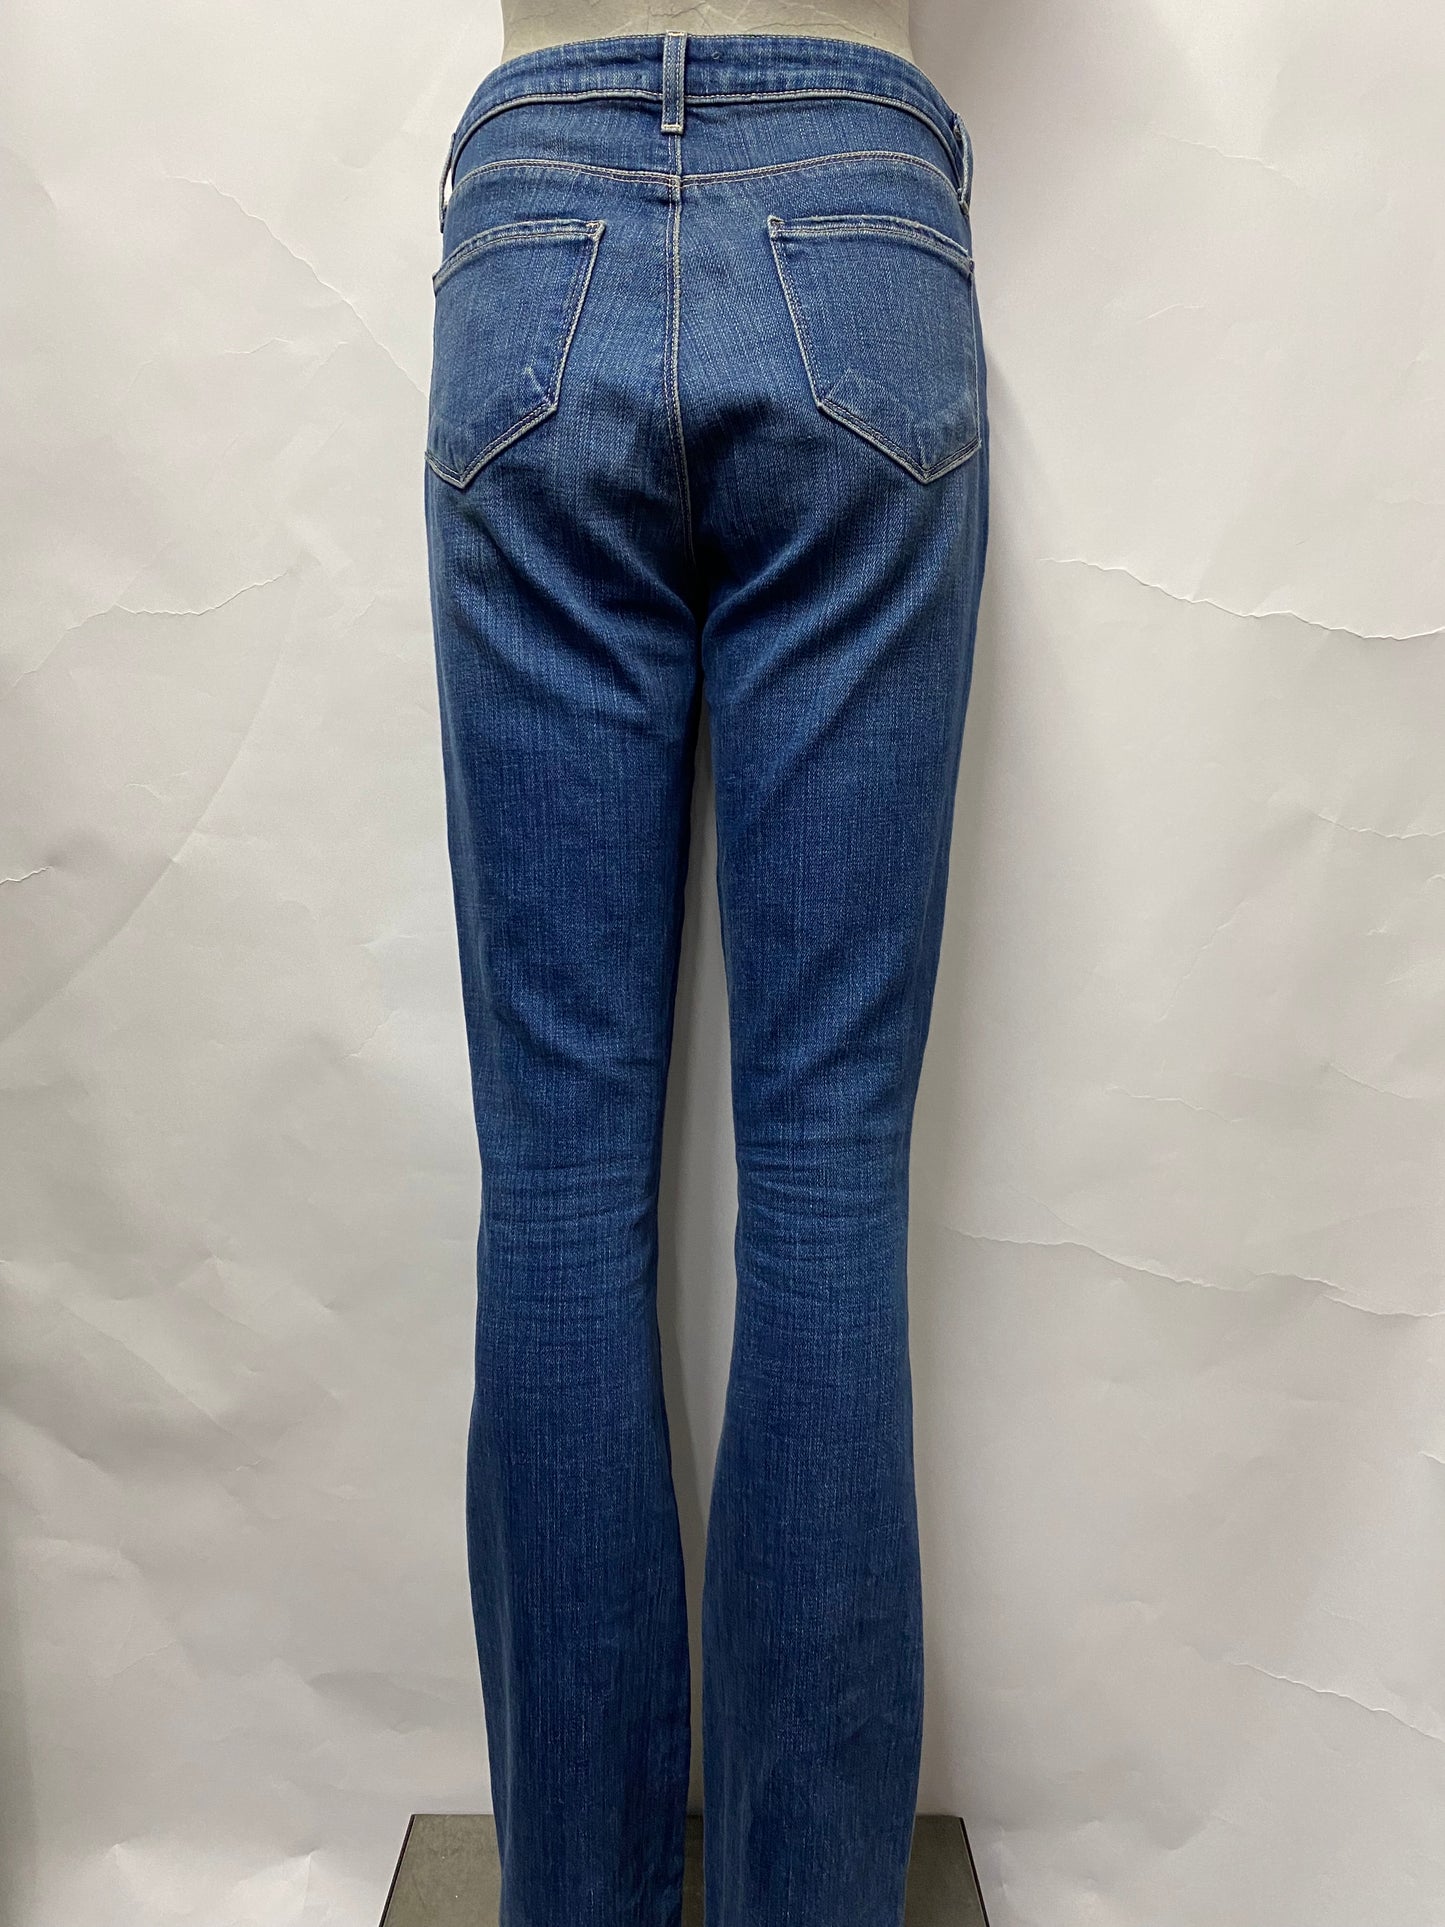 L’Agence Blue straight Fit Jeans 27